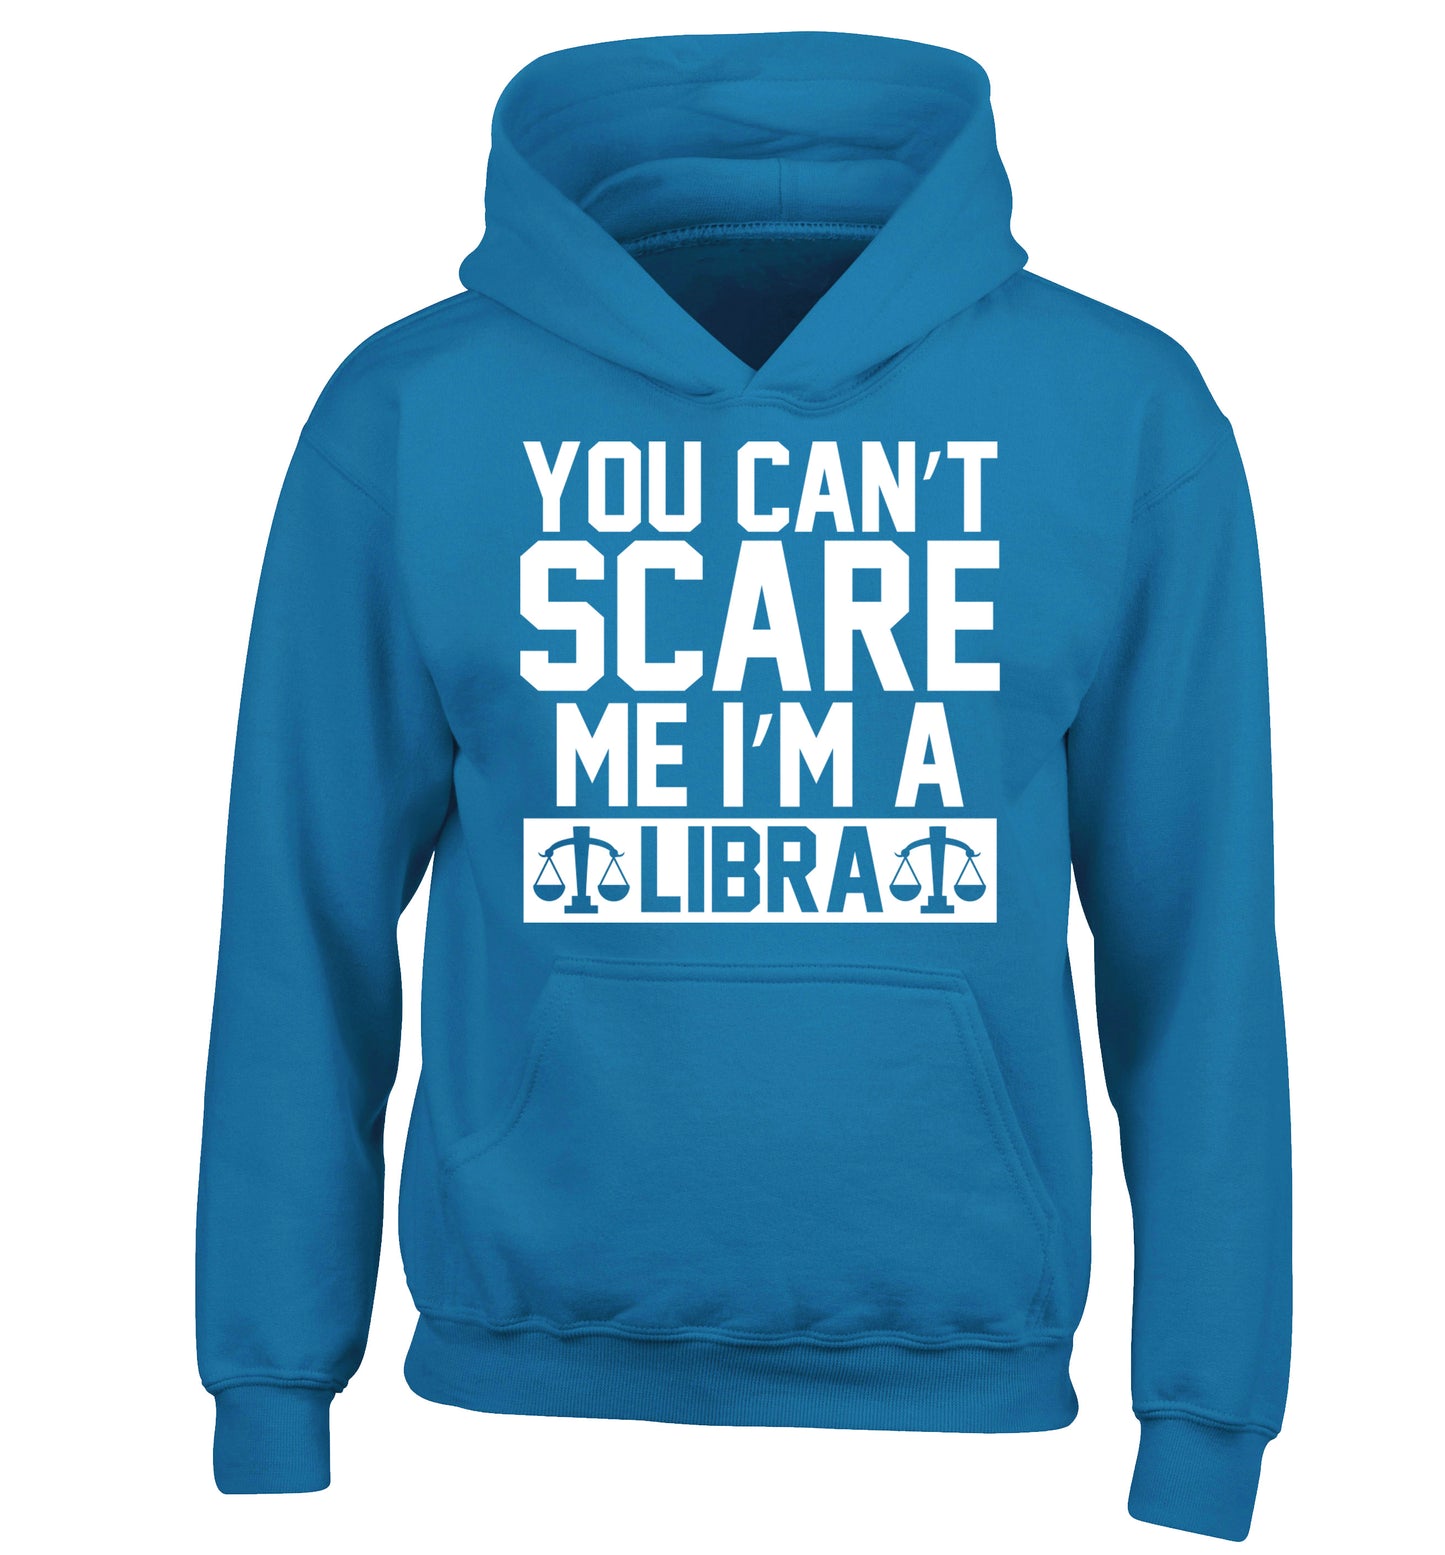 You can't scare me I'm a libra children's blue hoodie 12-13 Years